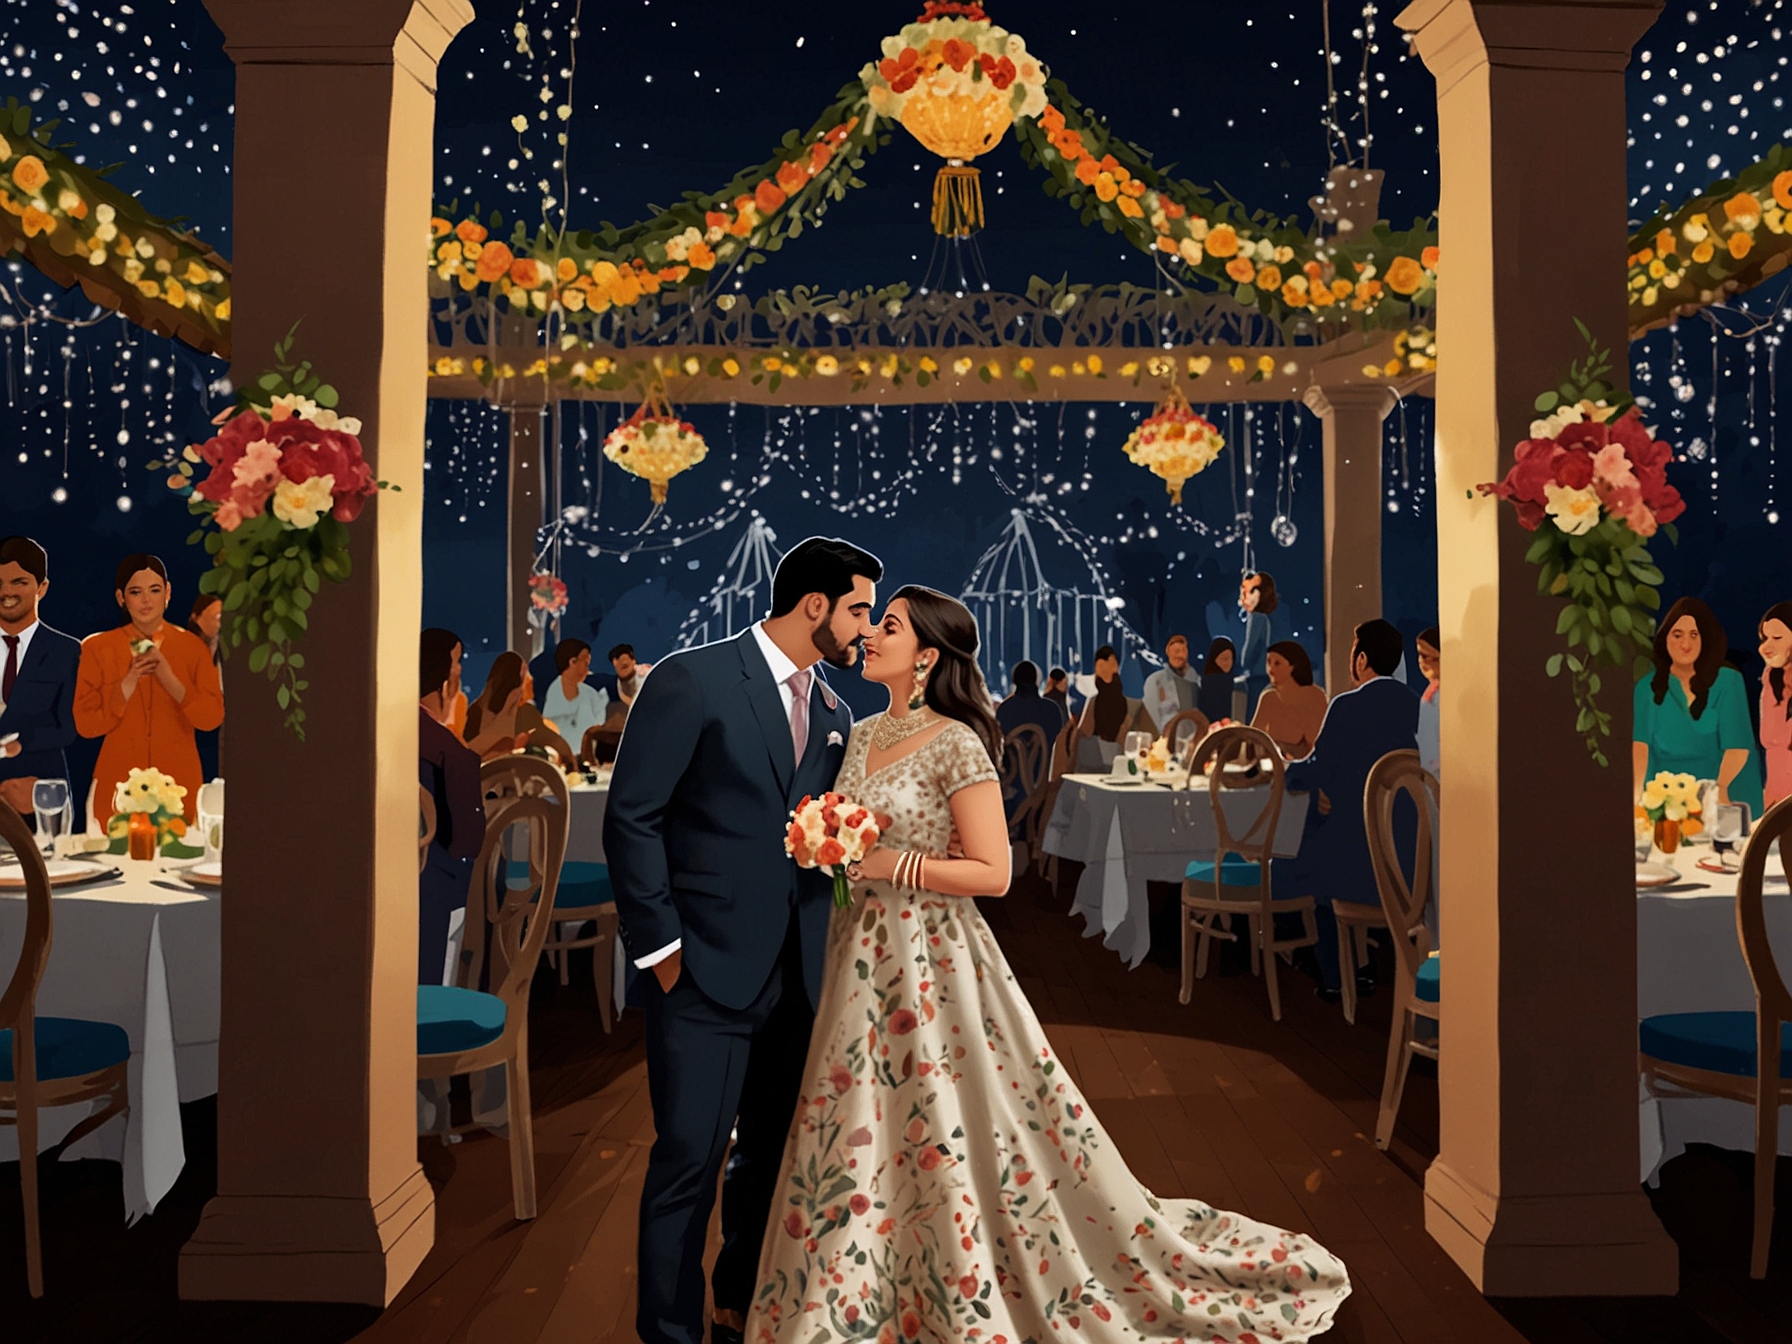 The lavishly decorated venue of Sonakshi and Zaheer's pre-wedding party, adorned with flowers and lights. Guests are seen enjoying the vibrant atmosphere and sumptuous cuisine.